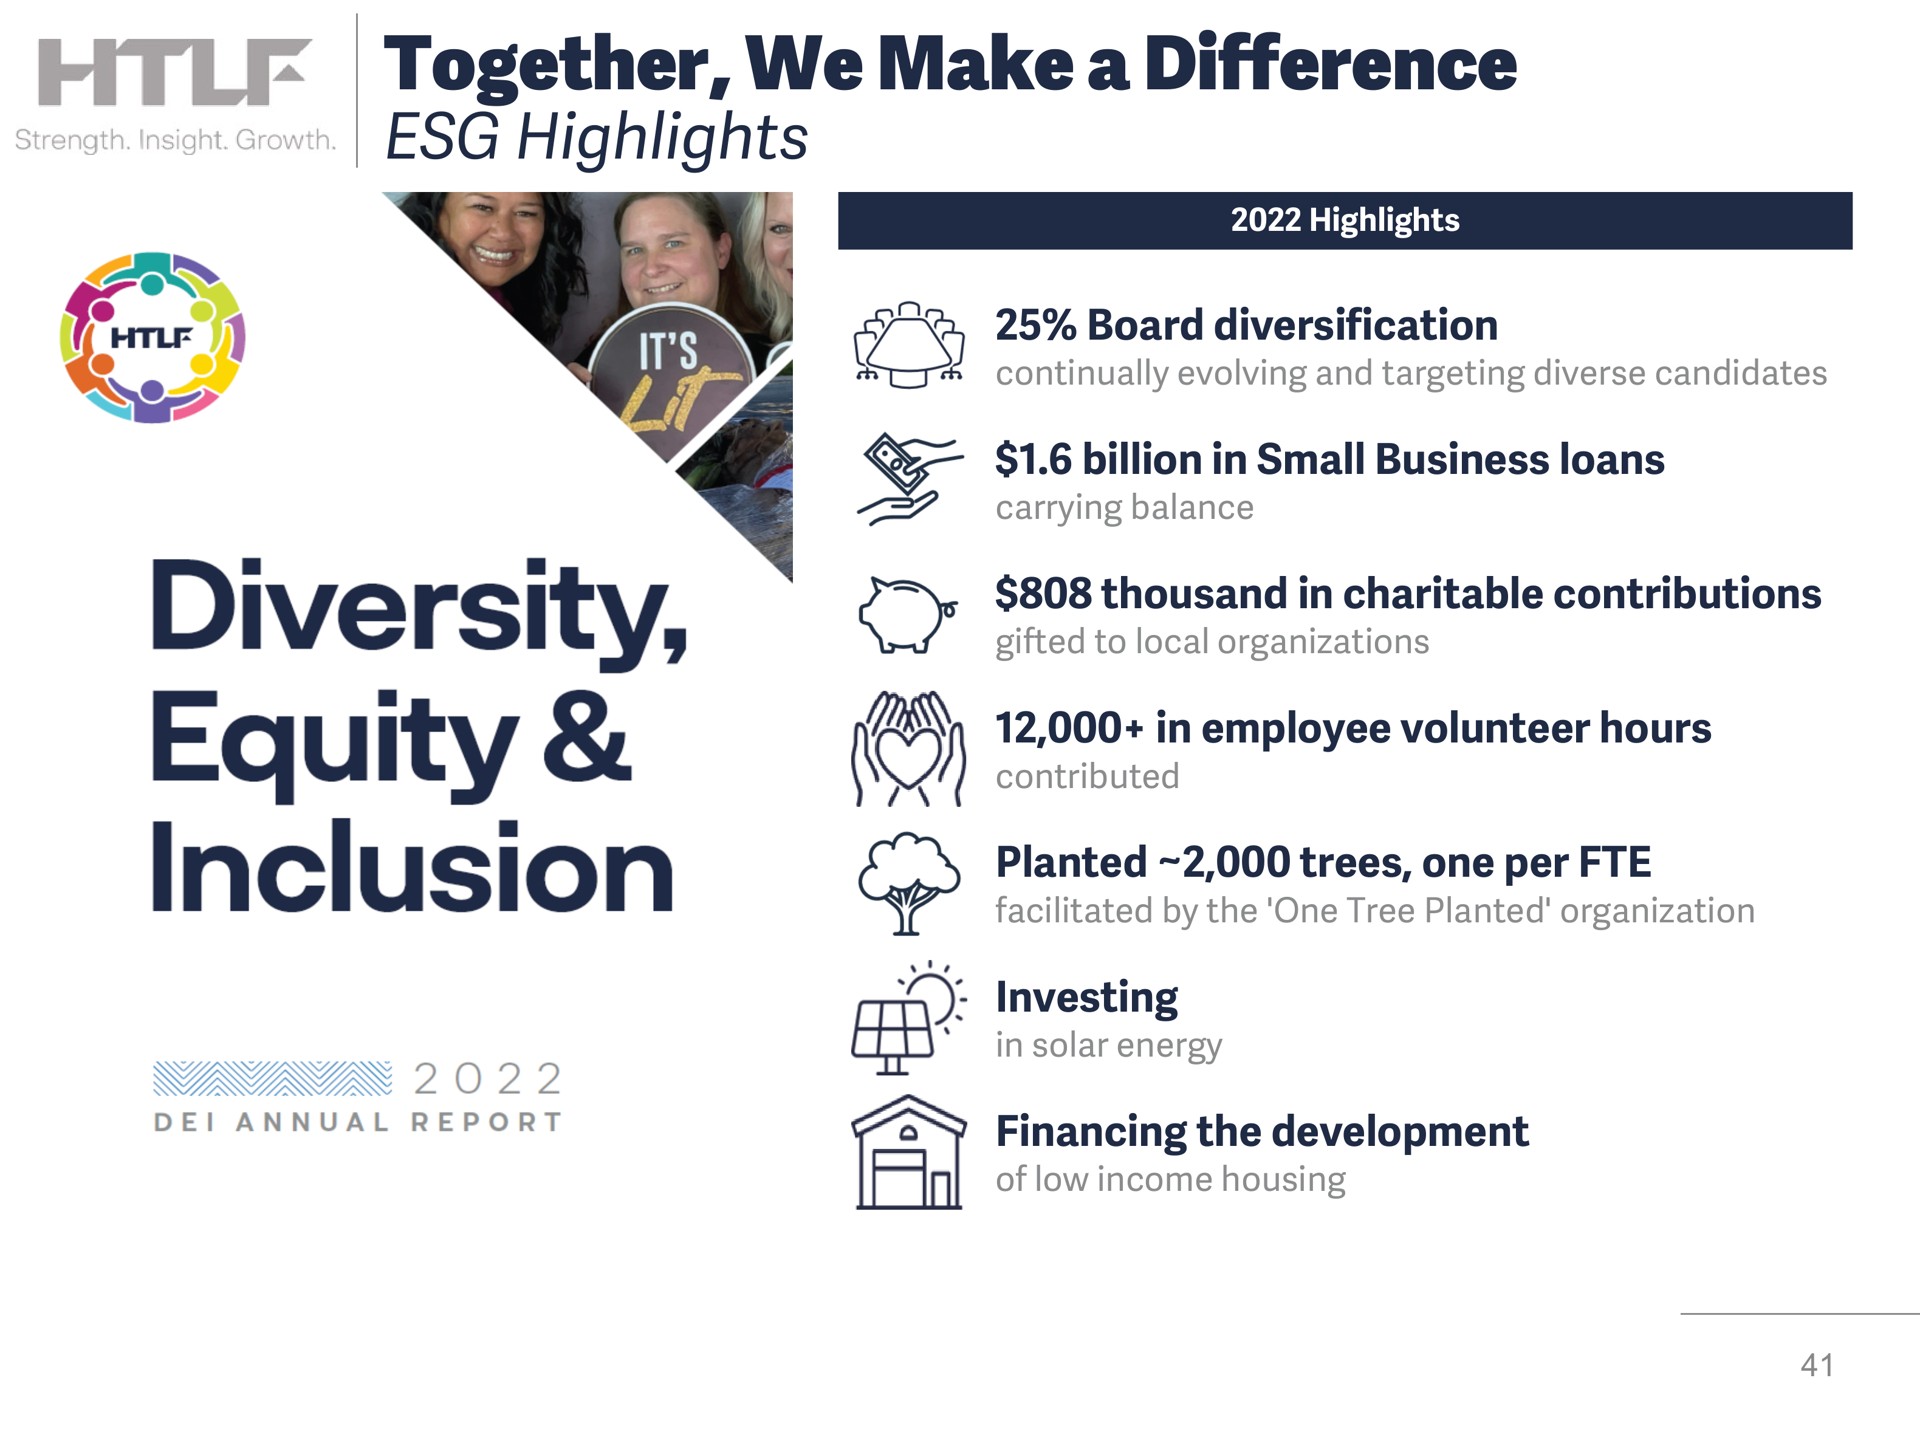 together we make a difference highlights an diversity inclusion board diversification employee volunteer hours | Heartland Financial USA